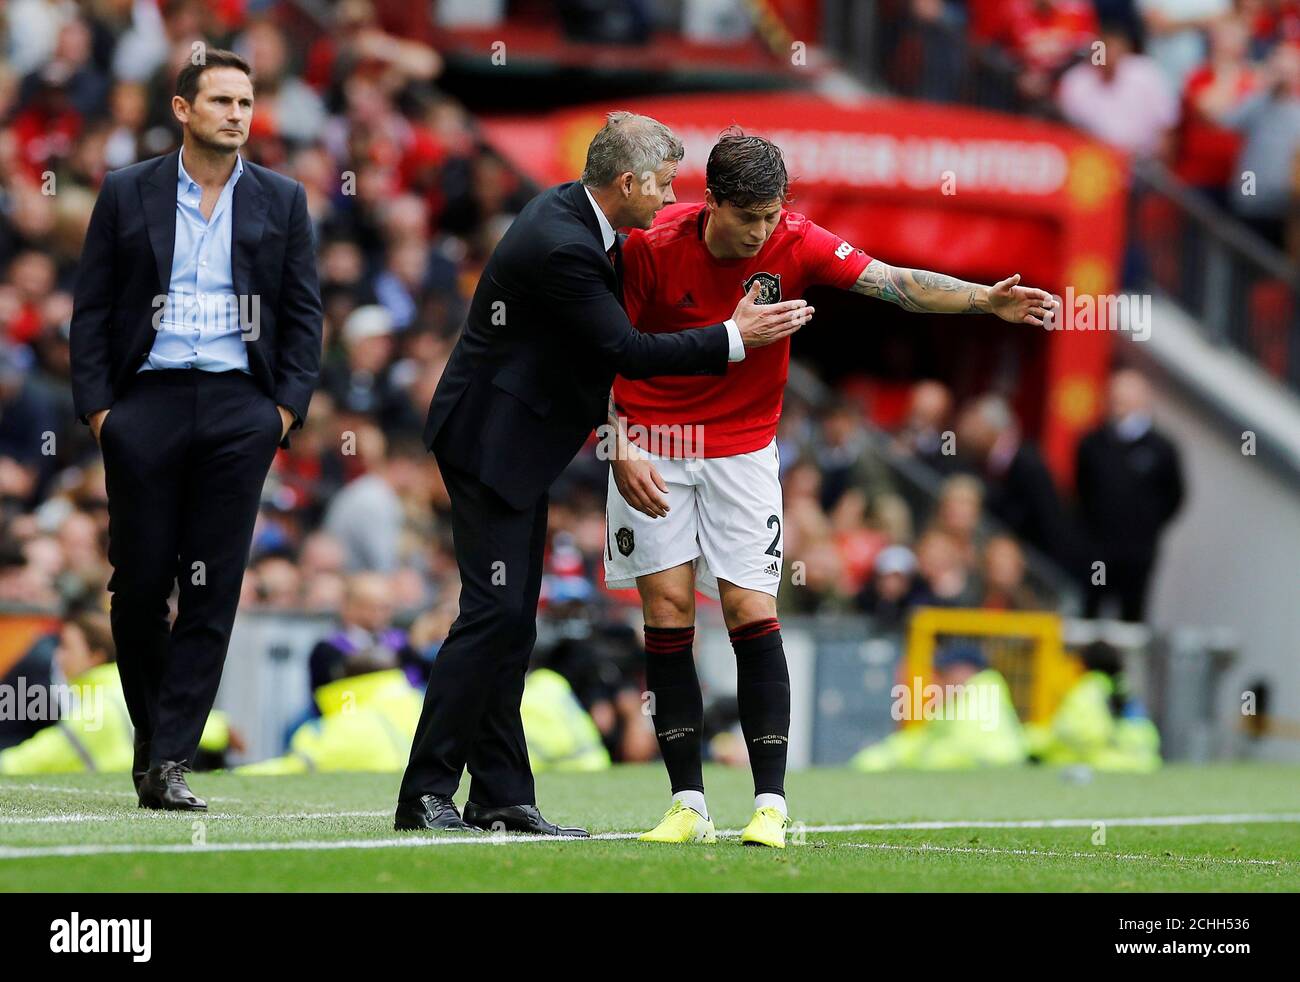 Soccer Football - Premier League - Manchester United v Chelsea - Old Trafford, Manchester, Britain - August 11, 2019  Manchester United's Victor Lindelof receives instructions from manager Ole Gunnar Solskjaer   REUTERS/Phil Noble  EDITORIAL USE ONLY. No use with unauthorized audio, video, data, fixture lists, club/league logos or 'live' services. Online in-match use limited to 75 images, no video emulation. No use in betting, games or single club/league/player publications.  Please contact your account representative for further details. Stock Photo